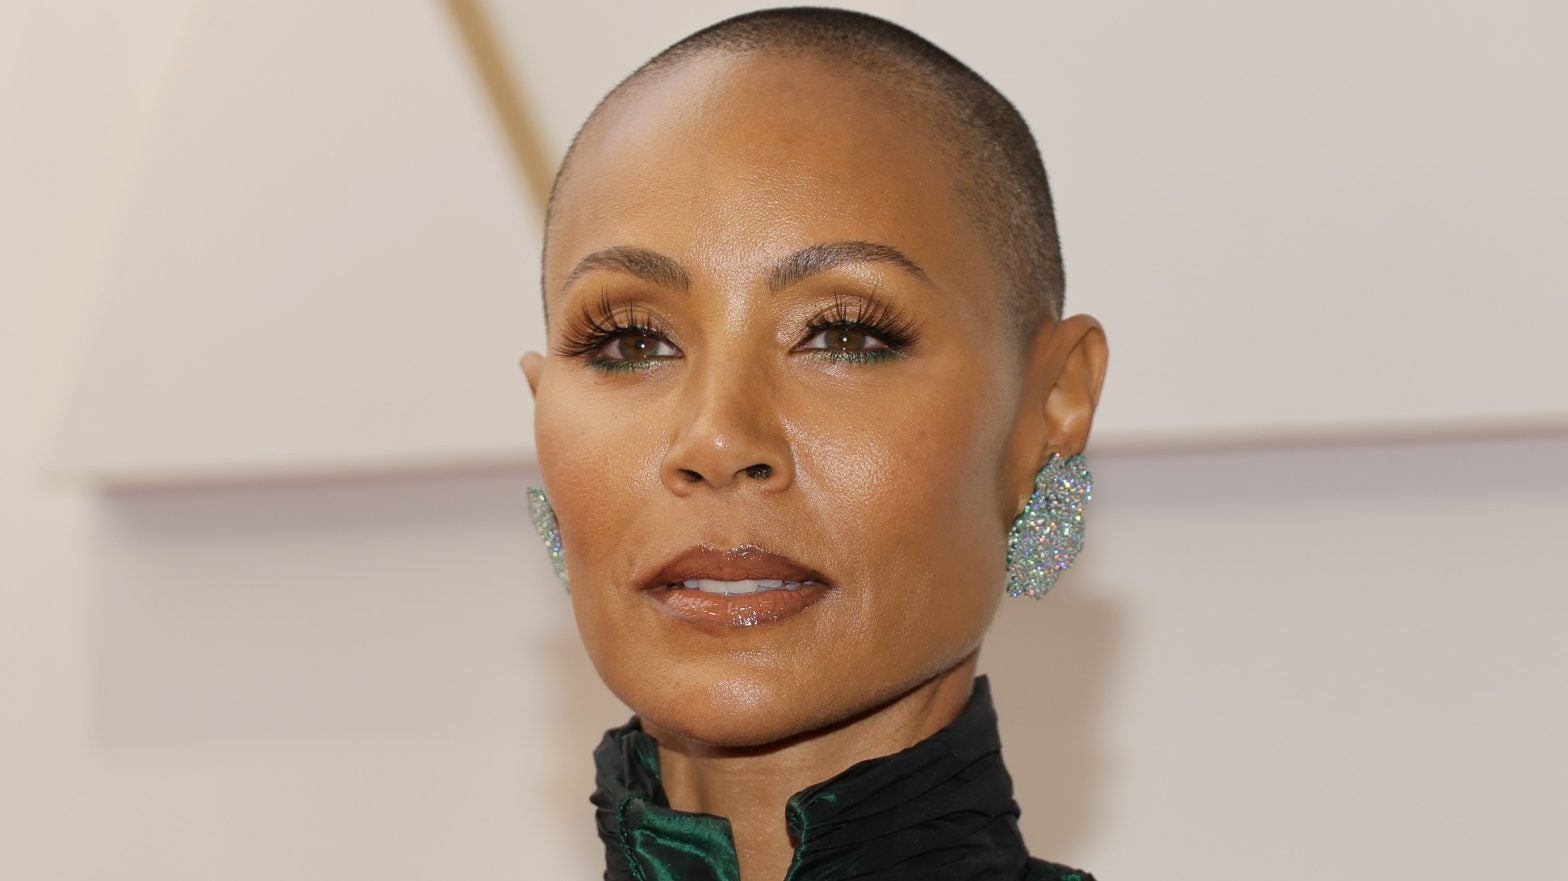 10 Times Jada Pinkett Smith's Hair And Makeup Set It Off On The Red Carpet